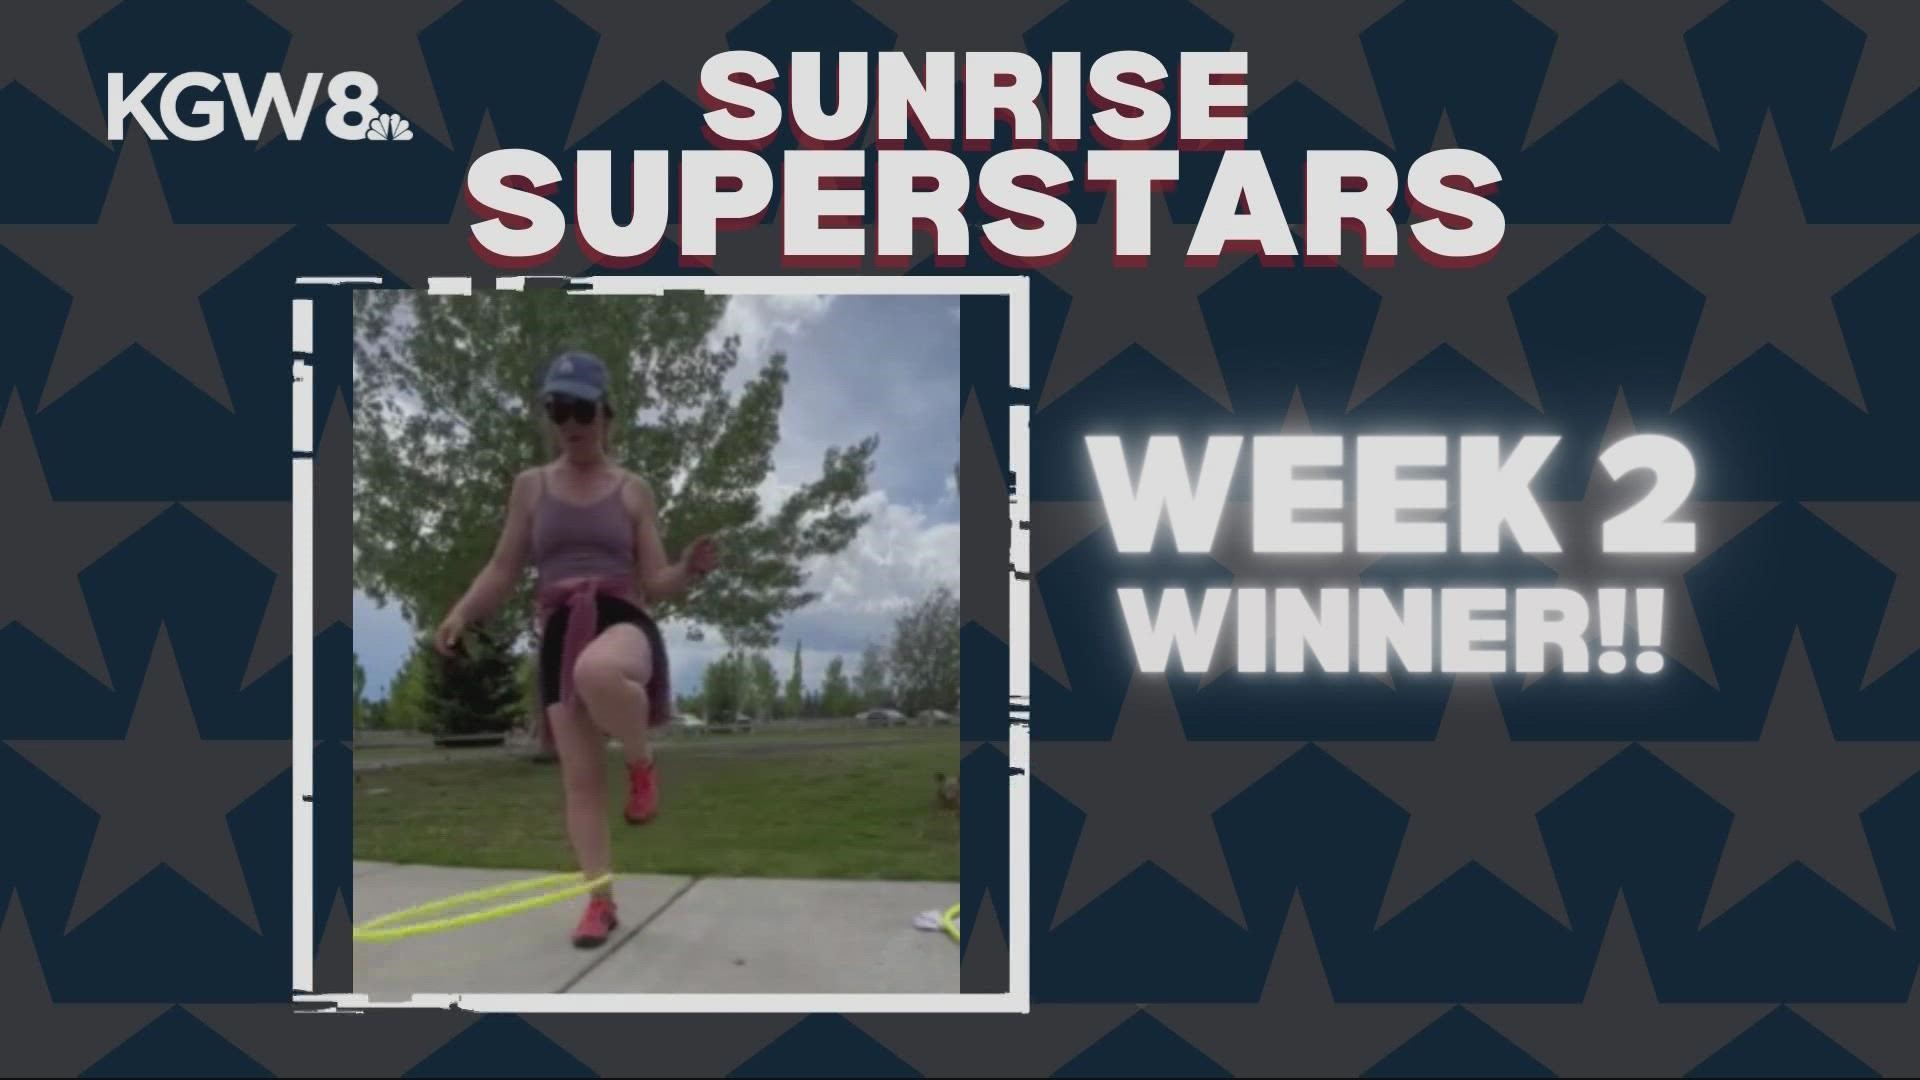 Contestants Catherine Wheat and 'LED Ninja' faced off for the chance to compete for the grand finale prize of performing on KGW News at Sunrise.